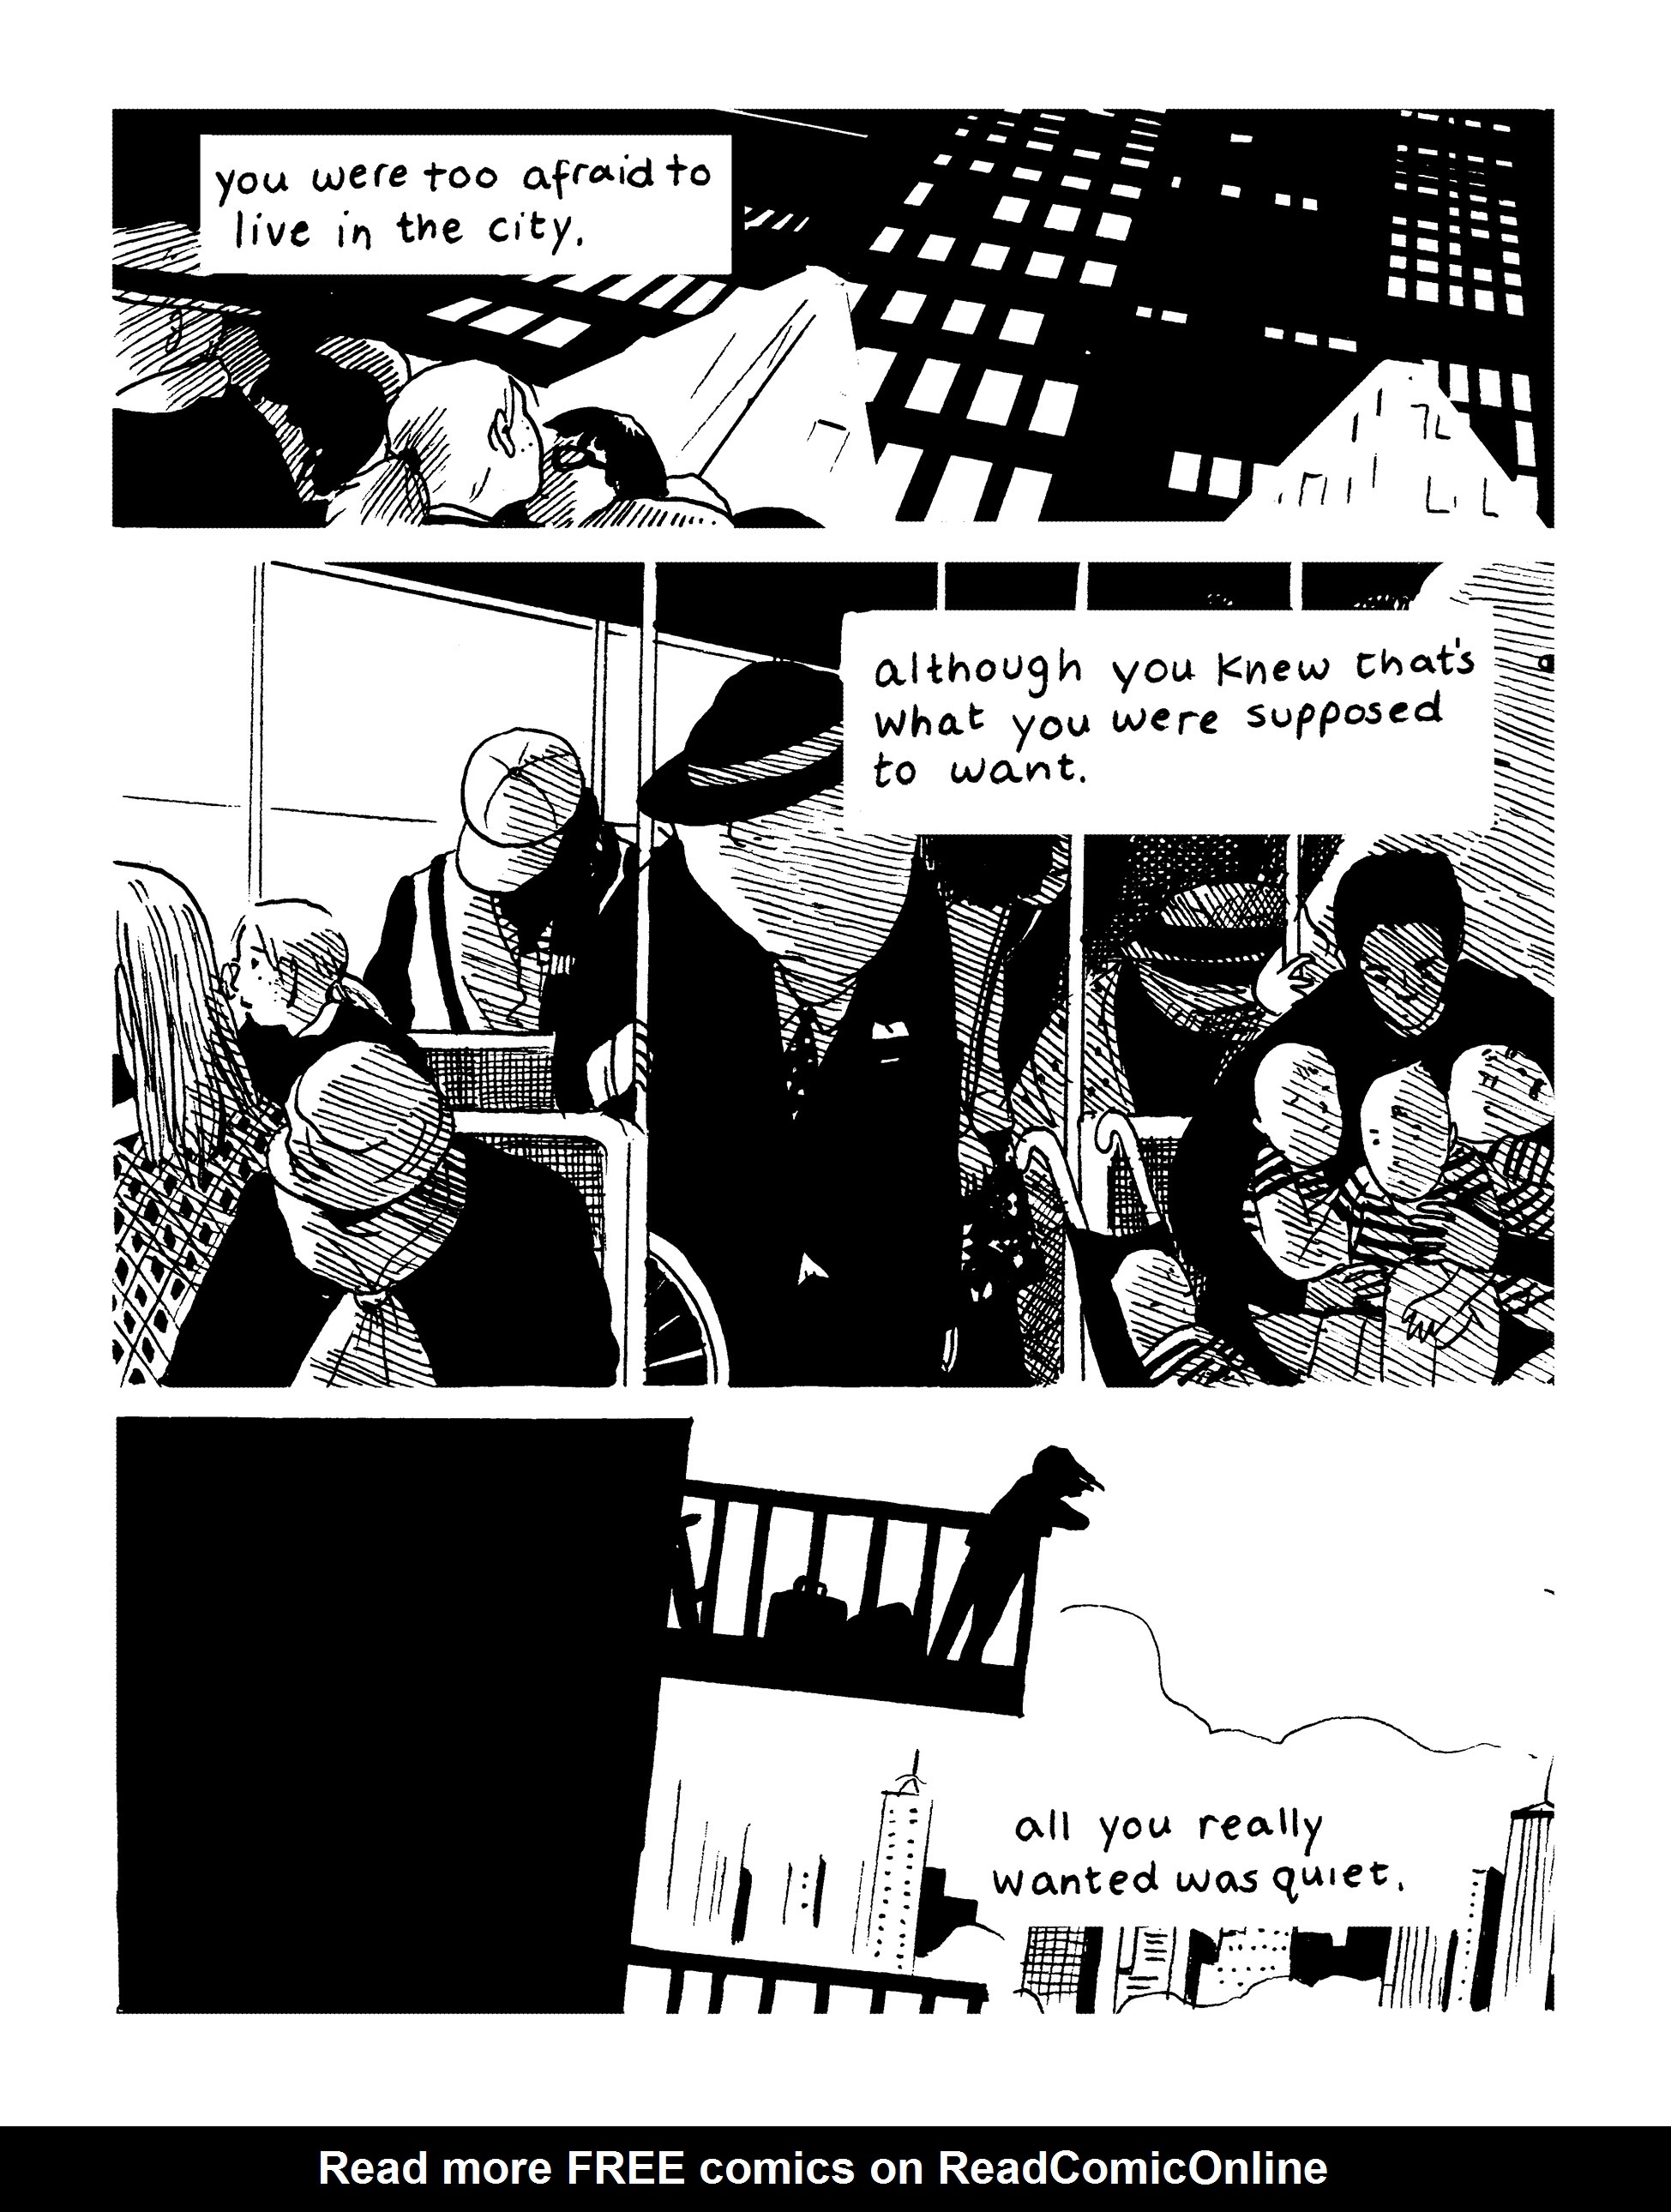 Read online A City Inside comic -  Issue # Full - 12